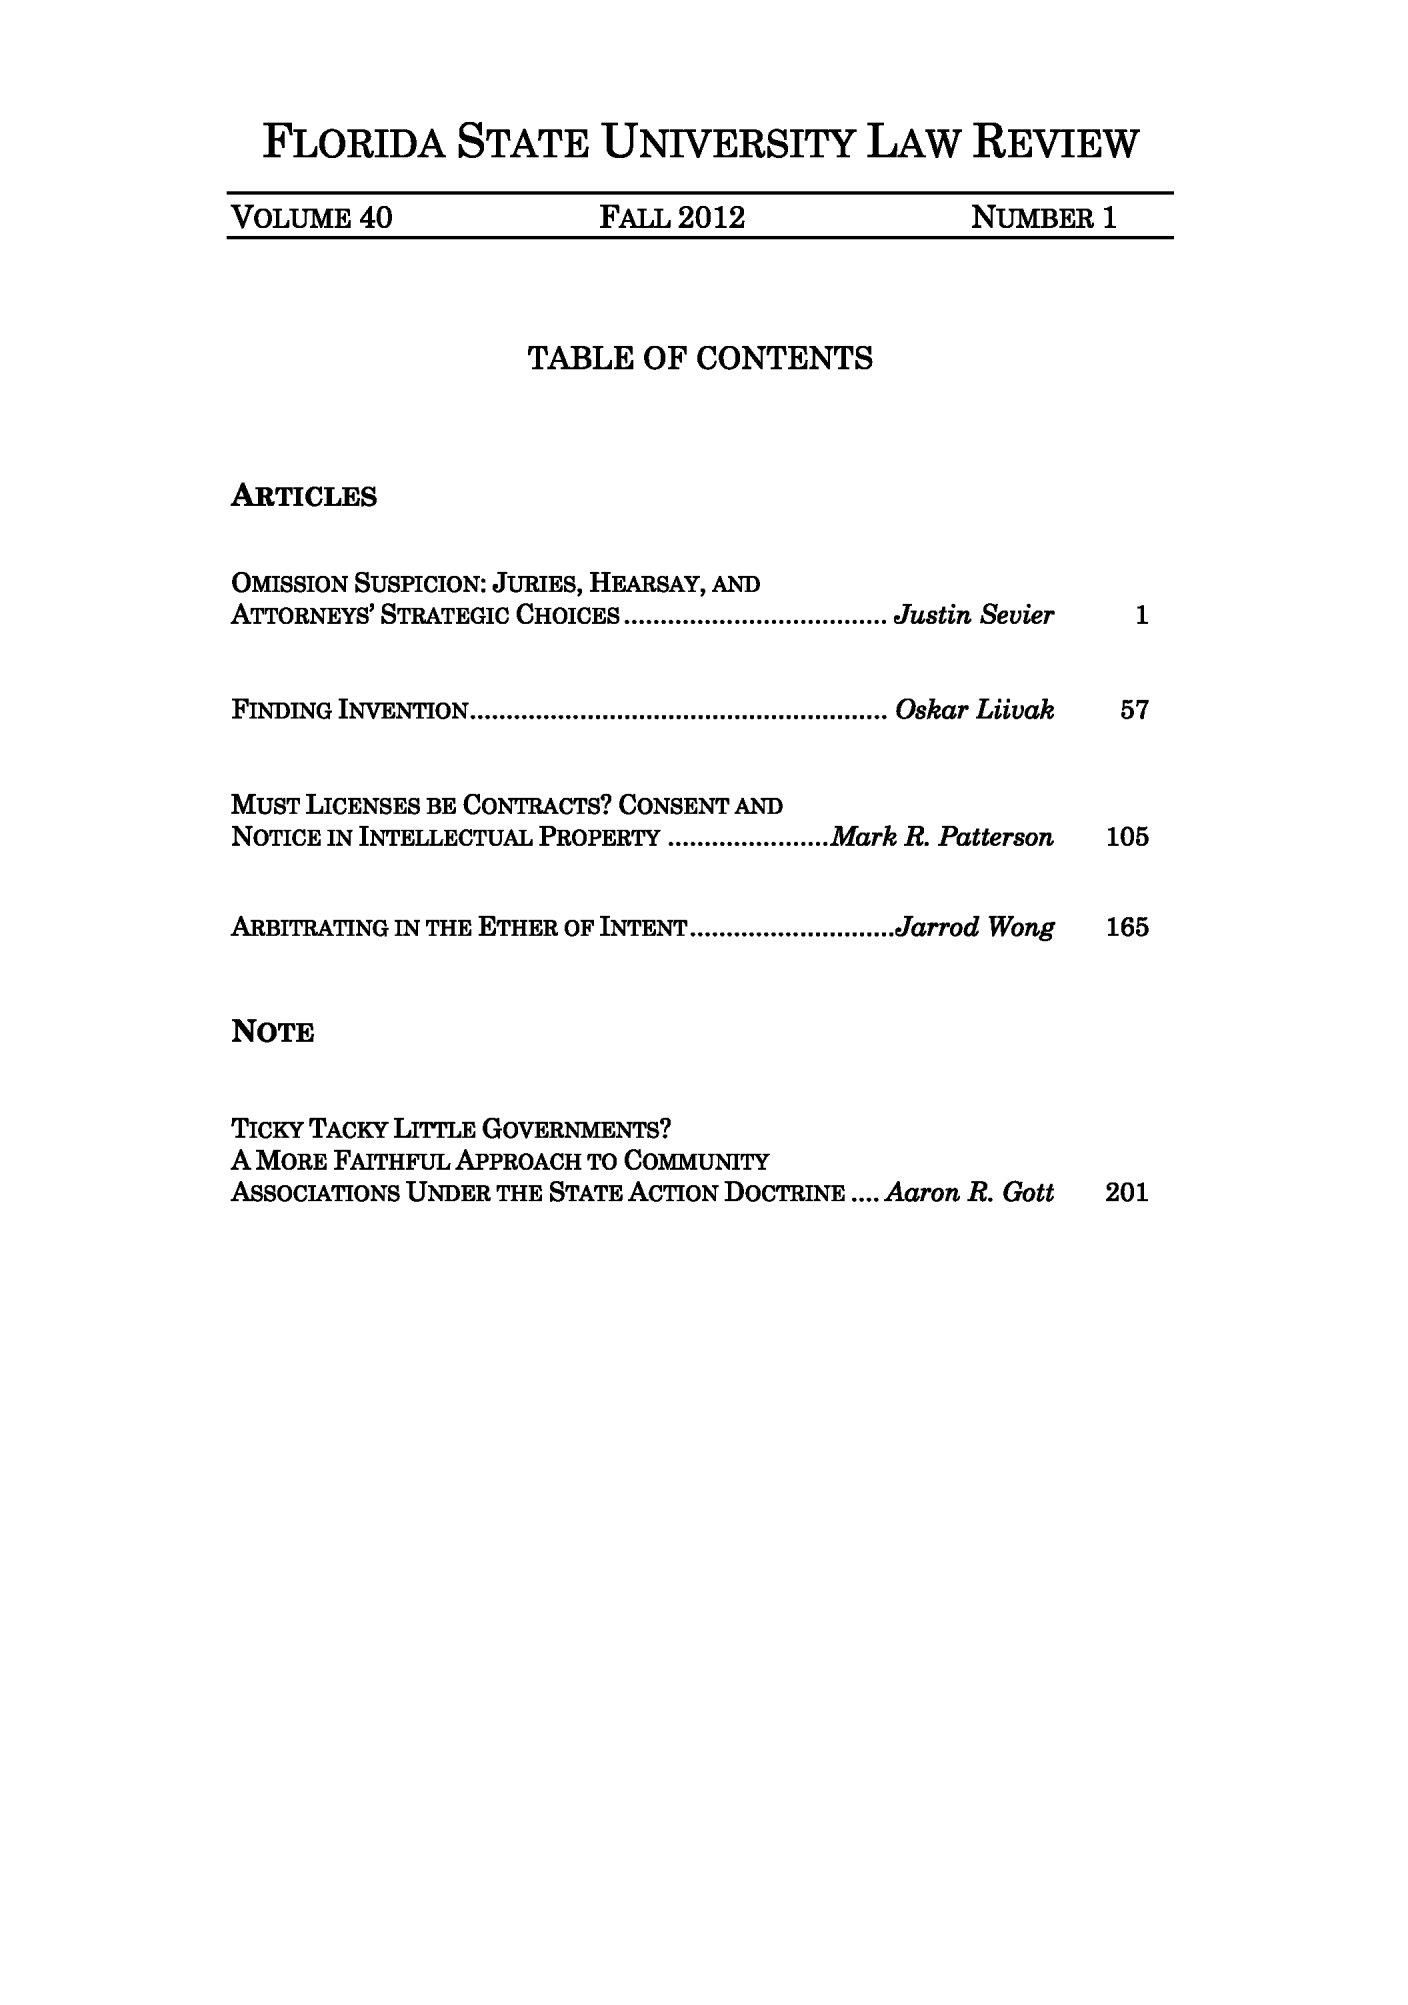 handle is hein.journals/flsulr40 and id is 1 raw text is: FLORIDA STATE UNIVERSITY LAW REVIEWVOLUME 40       FALL 2012      NUMBER 1TABLE OF CONTENTSARTICLESOMISSION SUSPICION: JURIES, HEARSAY, ANDATTORNEYS' STRATEGIC CHOICES...................JJustin SevierFINDING  INVENTION ......................................................... Oskar LiivakMUST LICENSES BE CONTRACTS? CONSENT ANDNOTICE IN INTELLECTUAL PROPERTY...........Mark R. PattersonARBITRATING IN THE ETHER OF INTENT..............Jarrod WongNOTETICKY TACKY LITTLE GOVERNMENTS?A MORE FAITHFUL APPROACH TO COMMUNITYASSOCIATIONS UNDER THE STATE ACTION DOCTRINE .... Aaron R. Gott157105165201